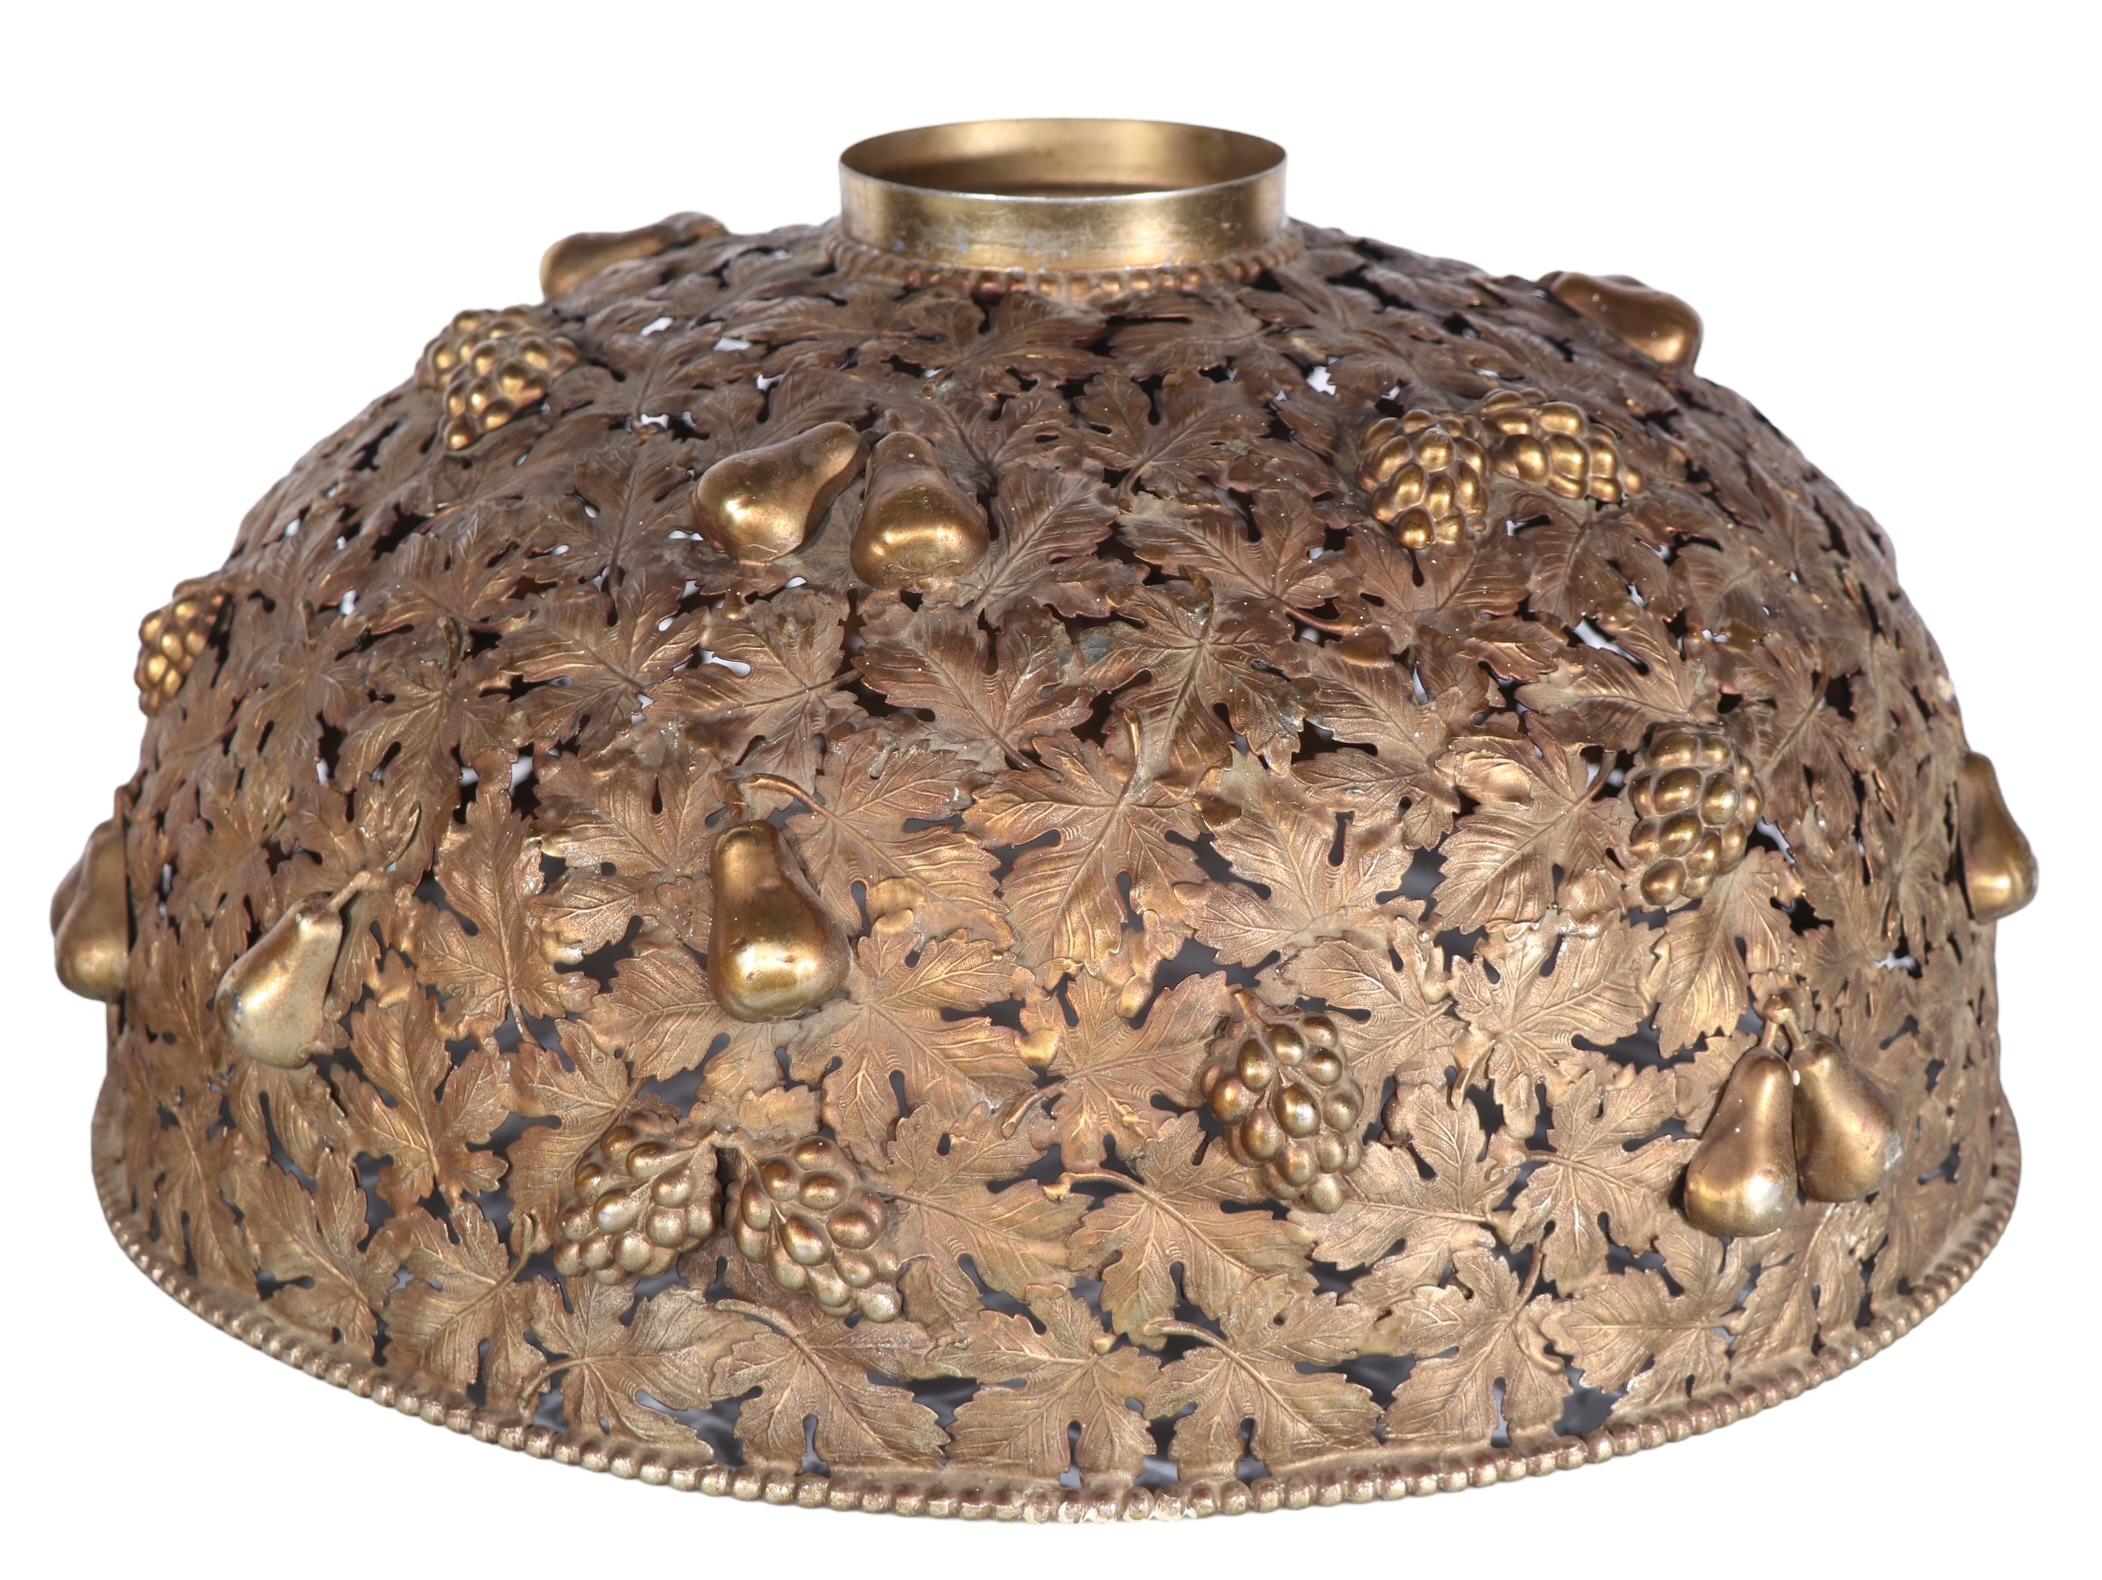 Ornate Arts and Crafts Metal Foliate Dome Form Lamp Shade  For Sale 12